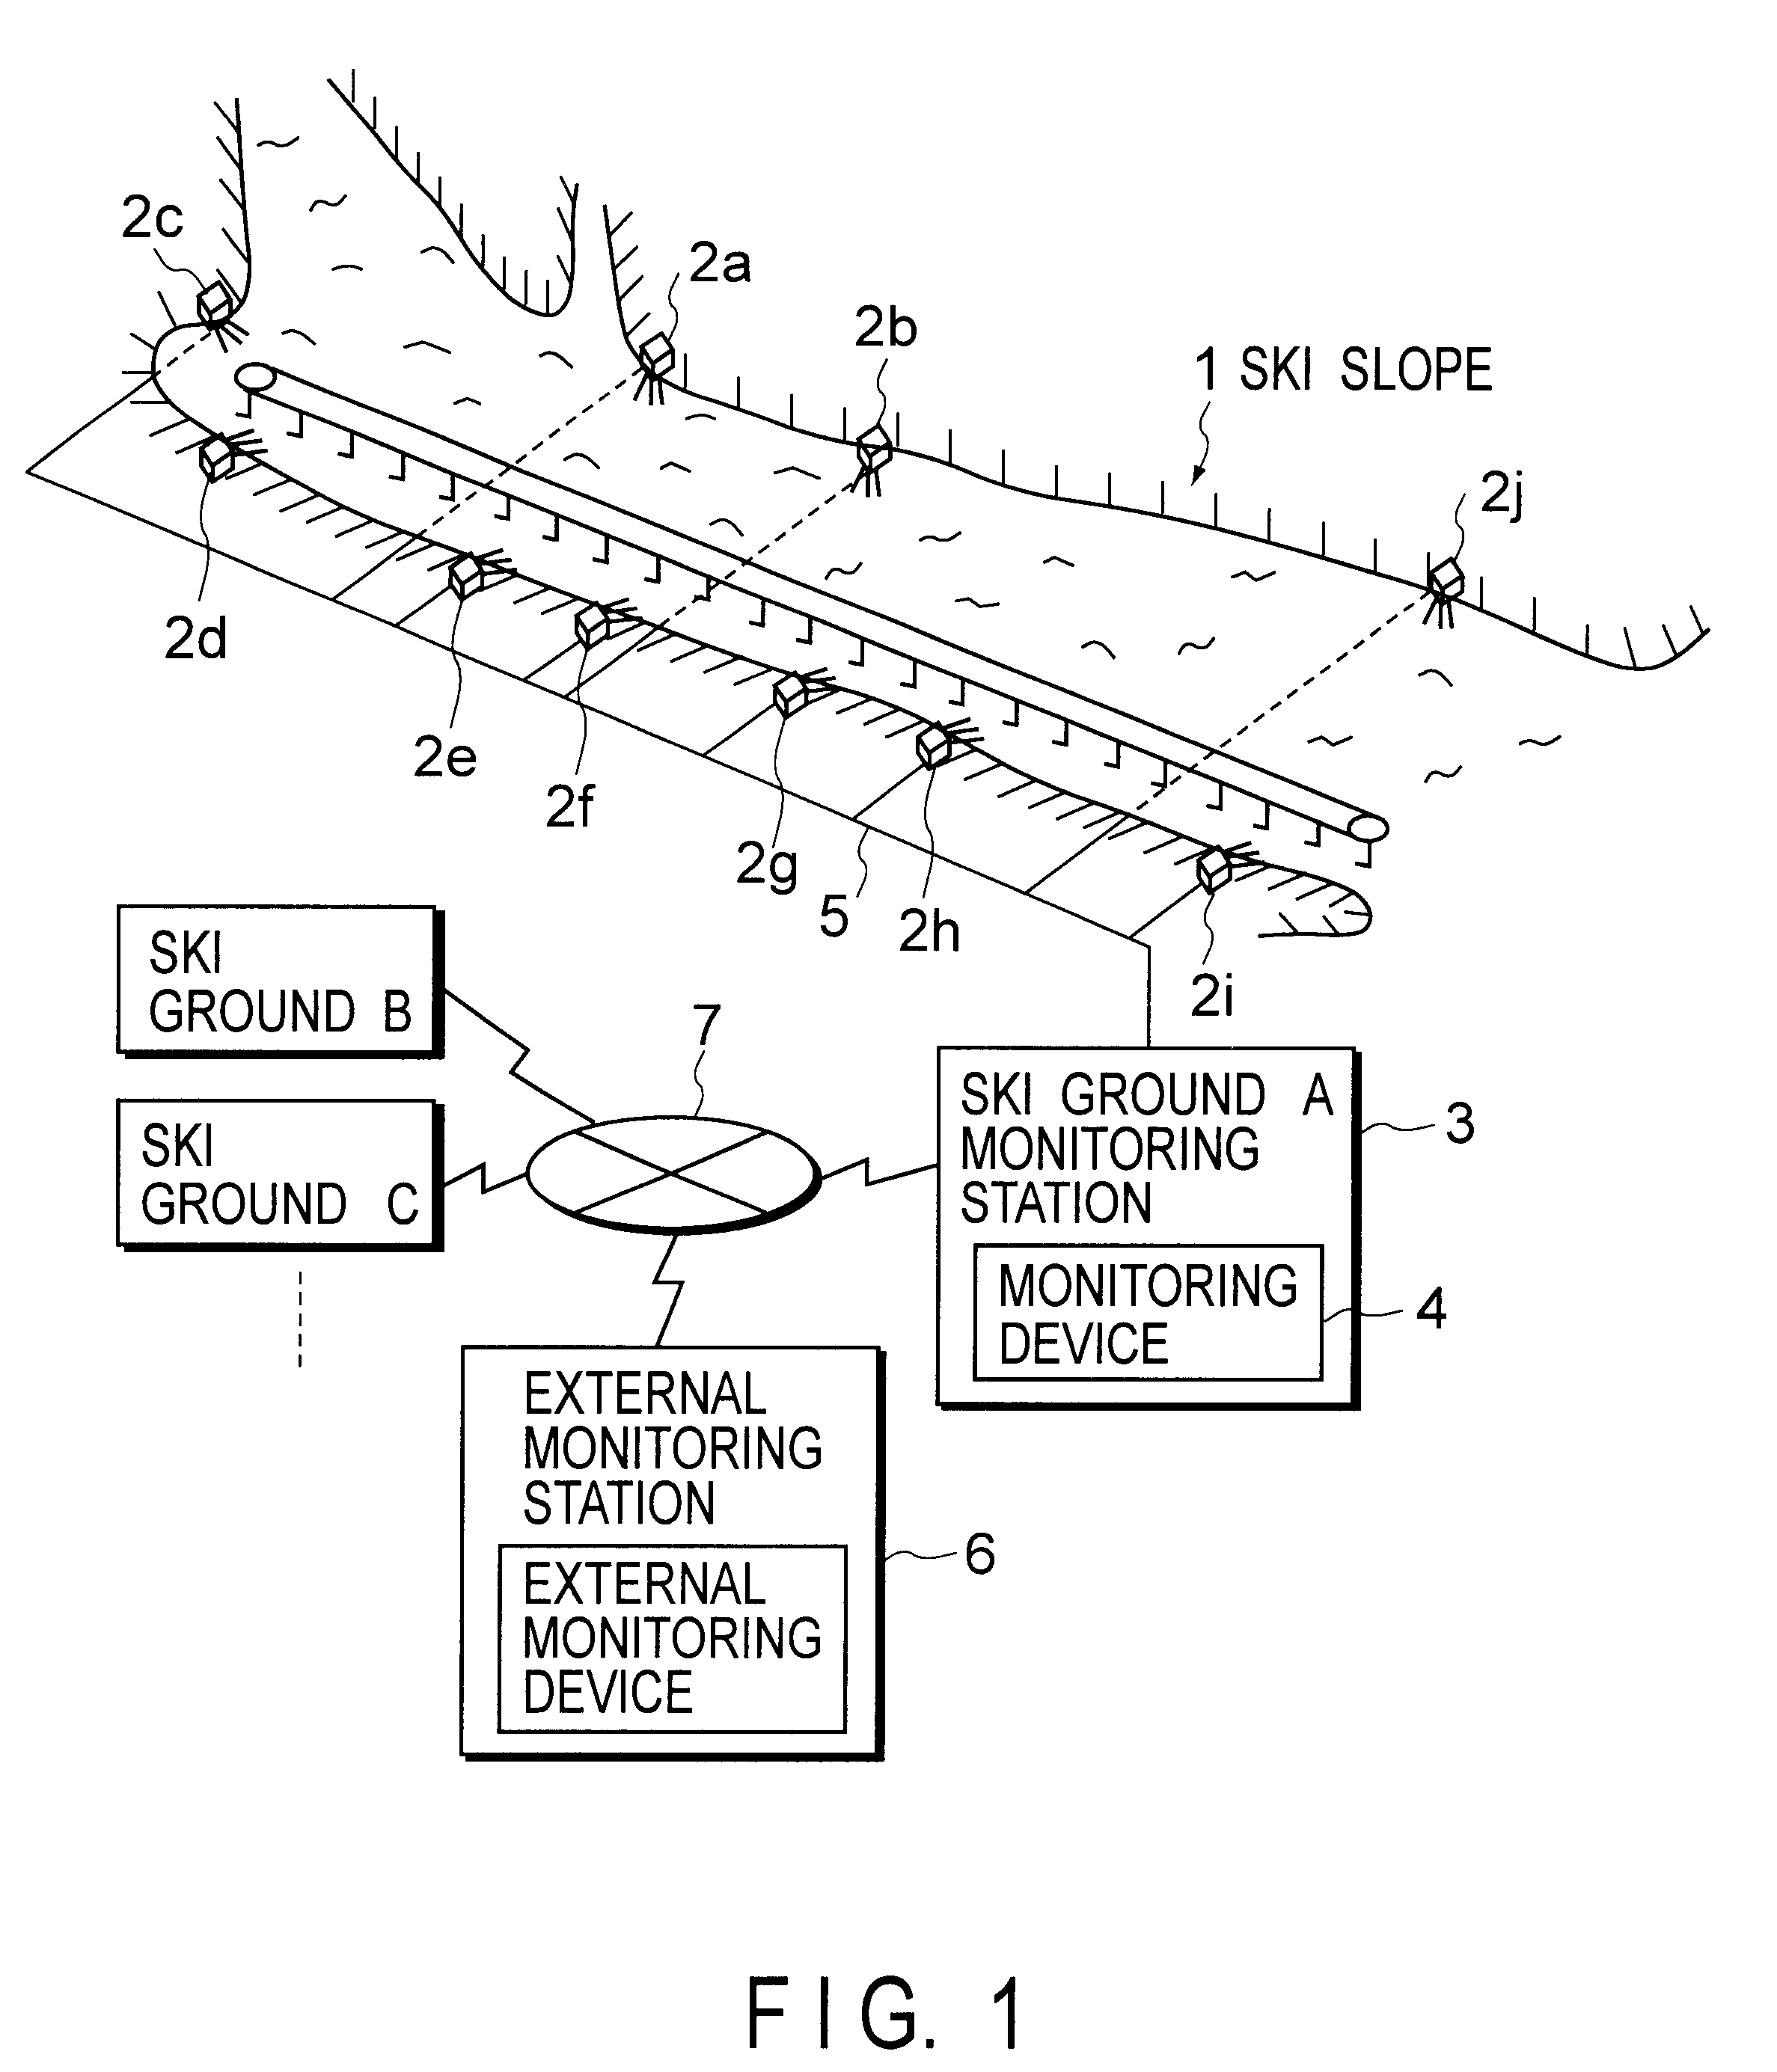 System and method for remotely monitoring artificial snow maker of ice crushing type